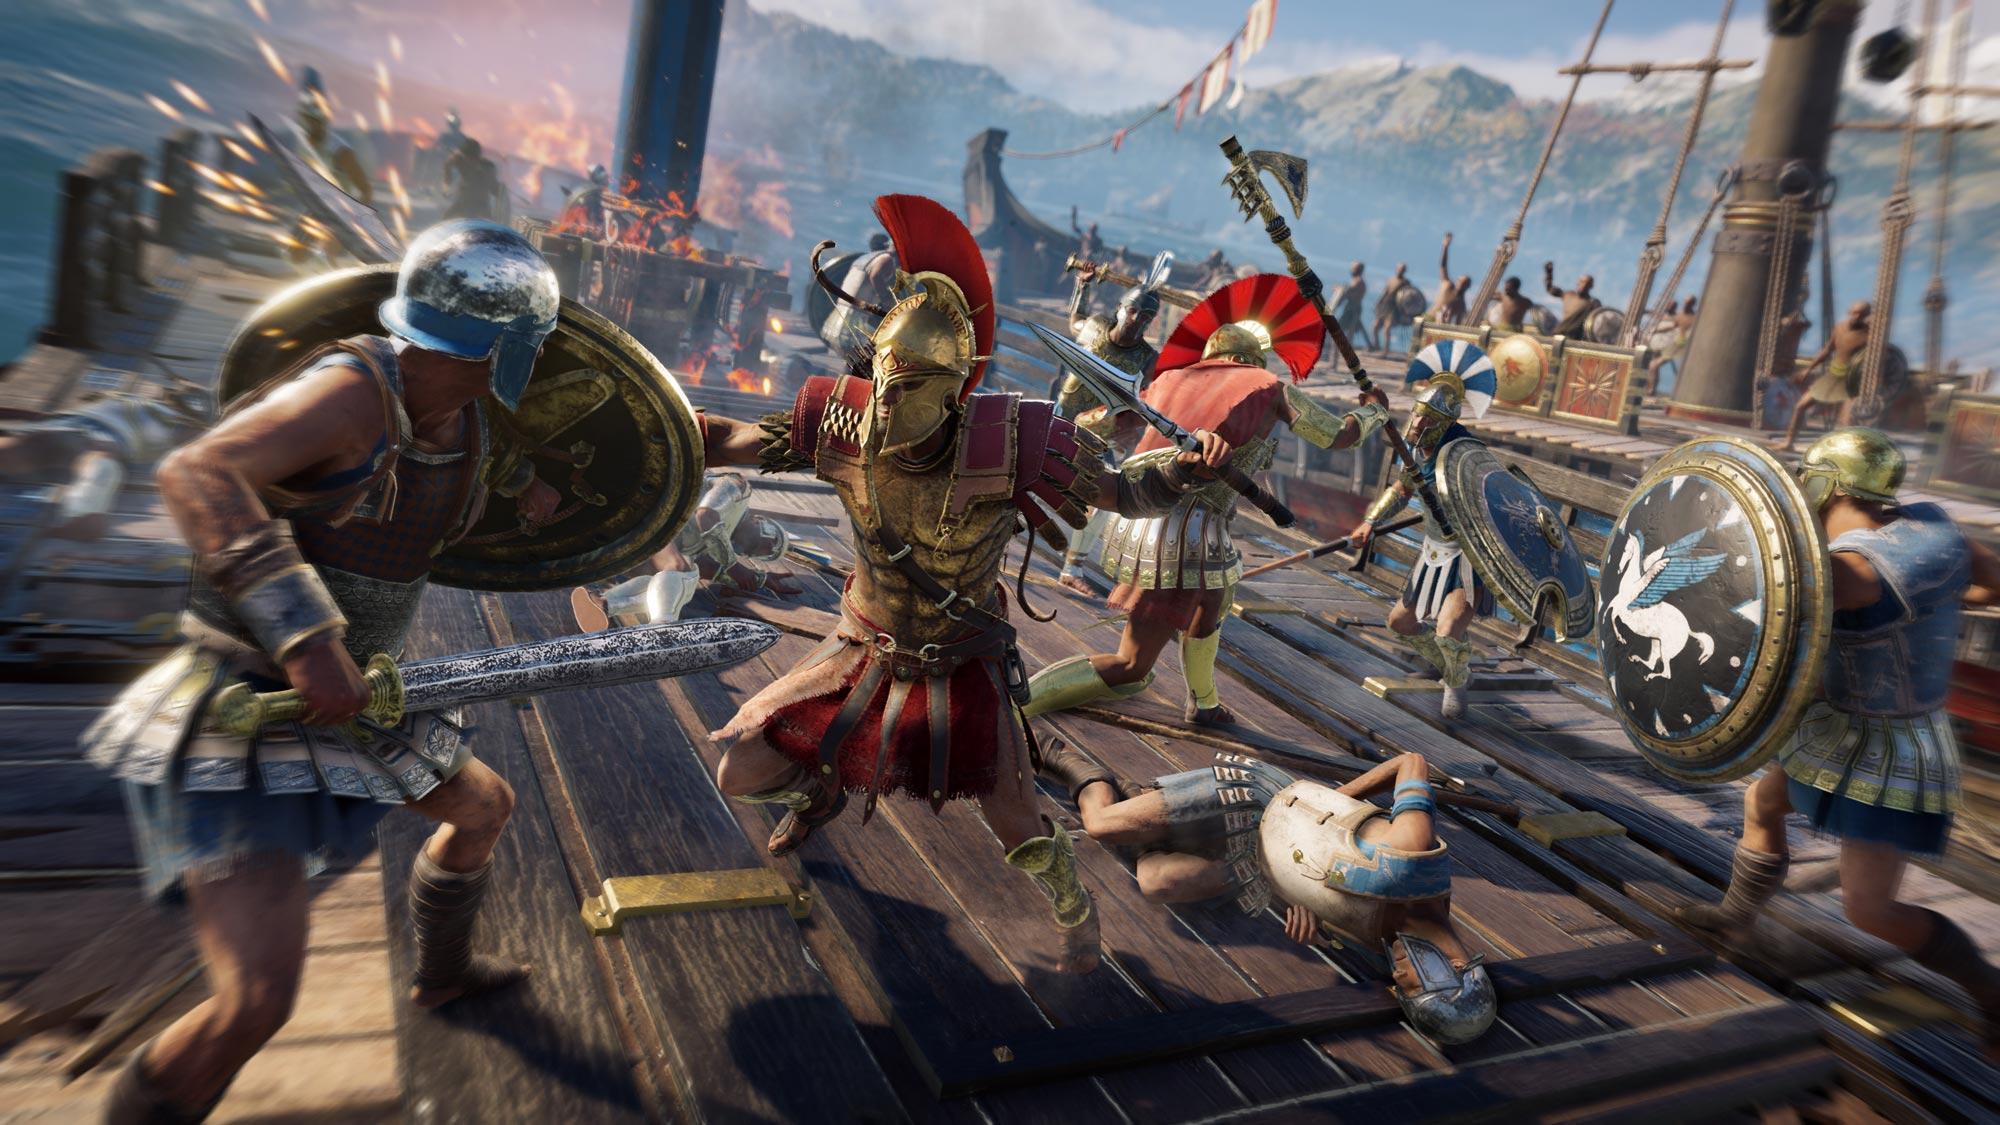 Assassin's Creed Odyssey is the best game in the series